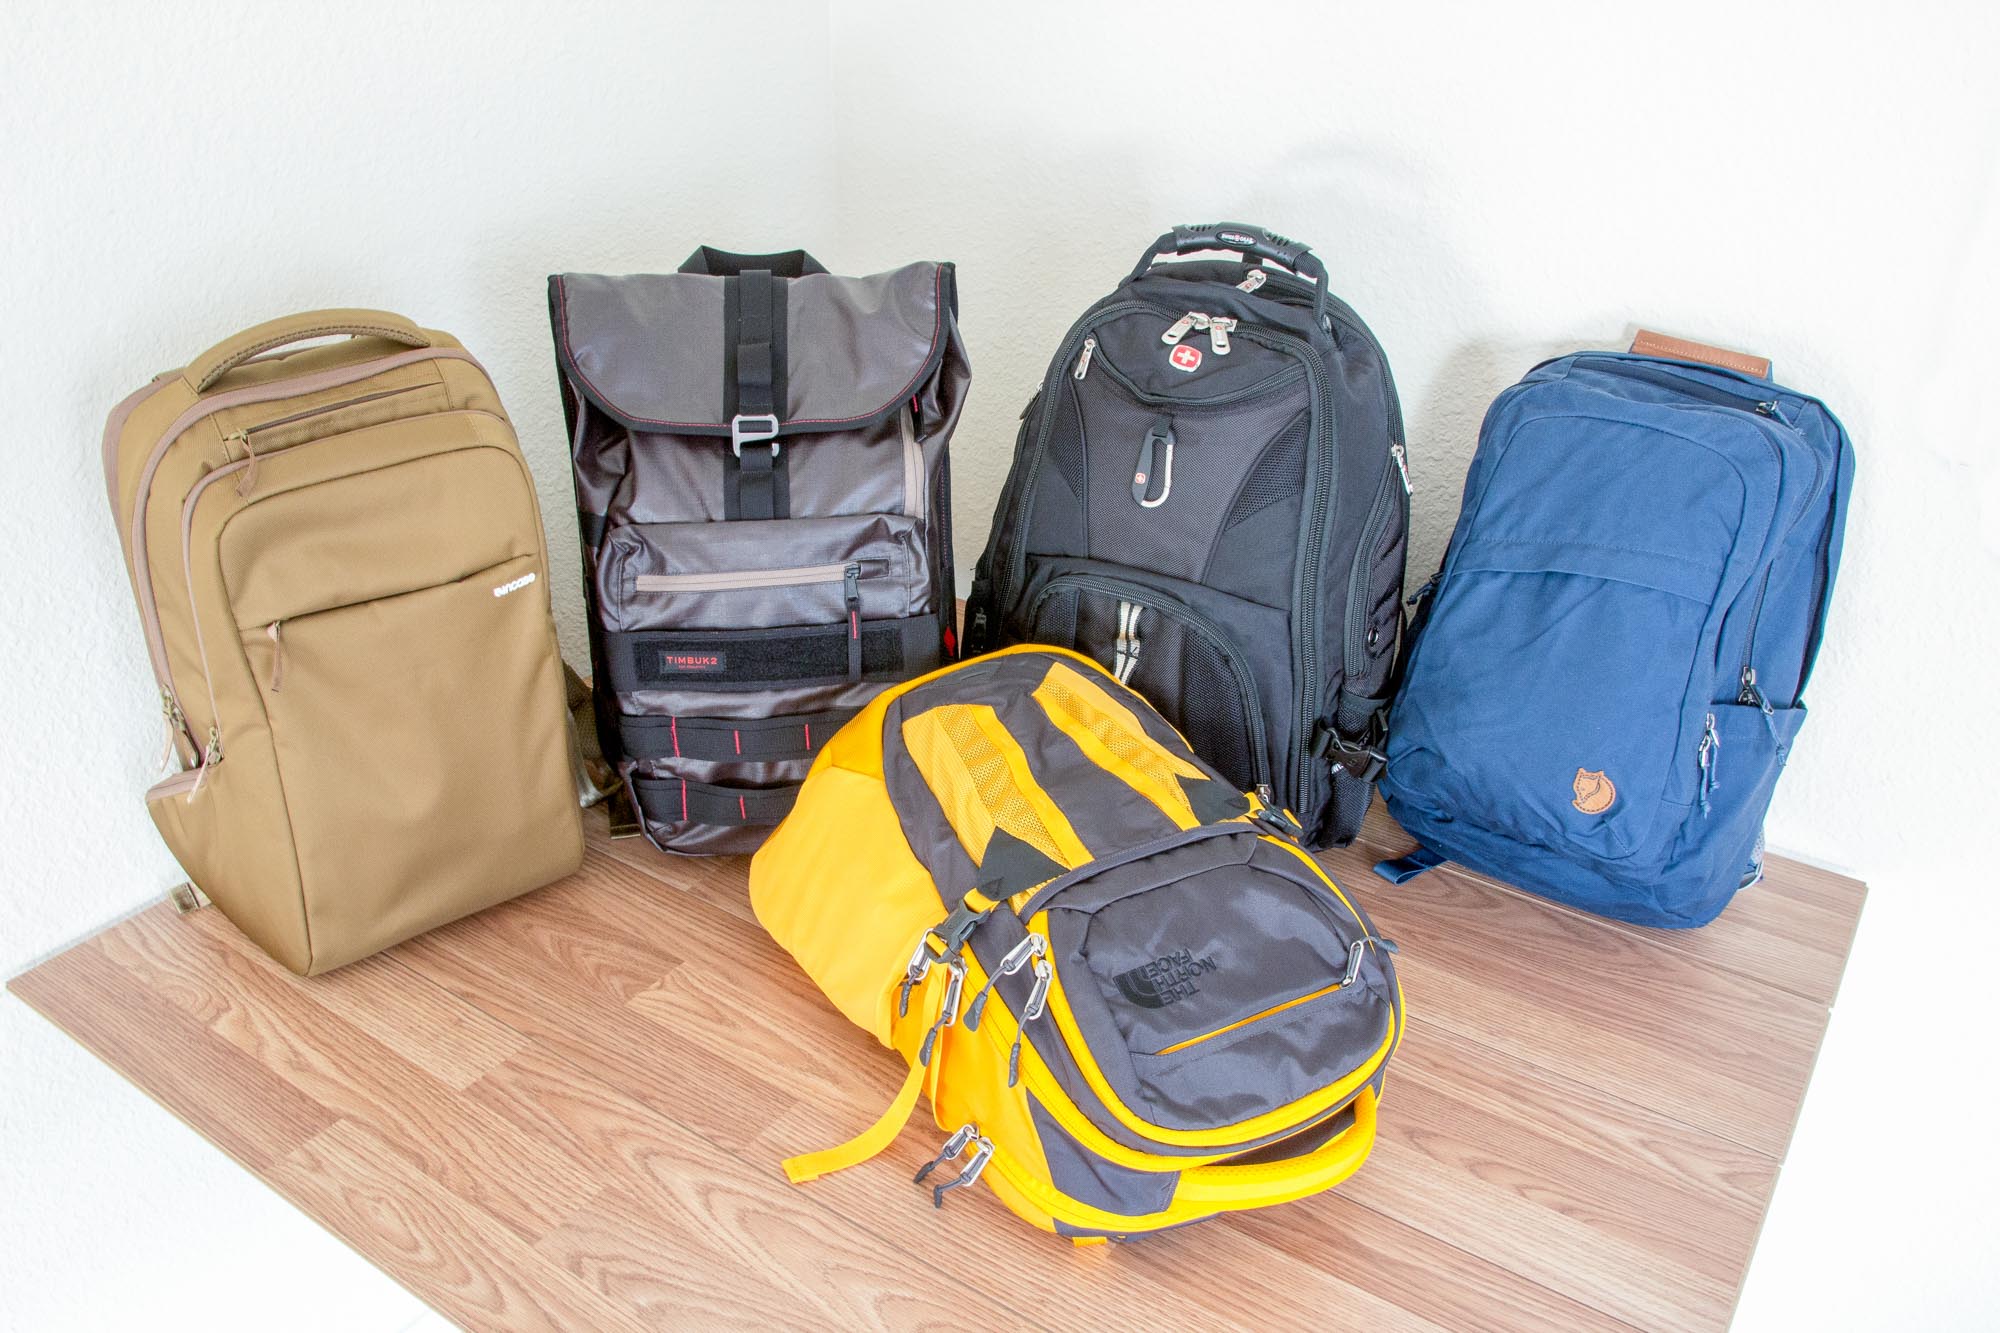 inject electrode clergyman The Best Backpacks for College of 2022 - Reviews by Your Best Digs